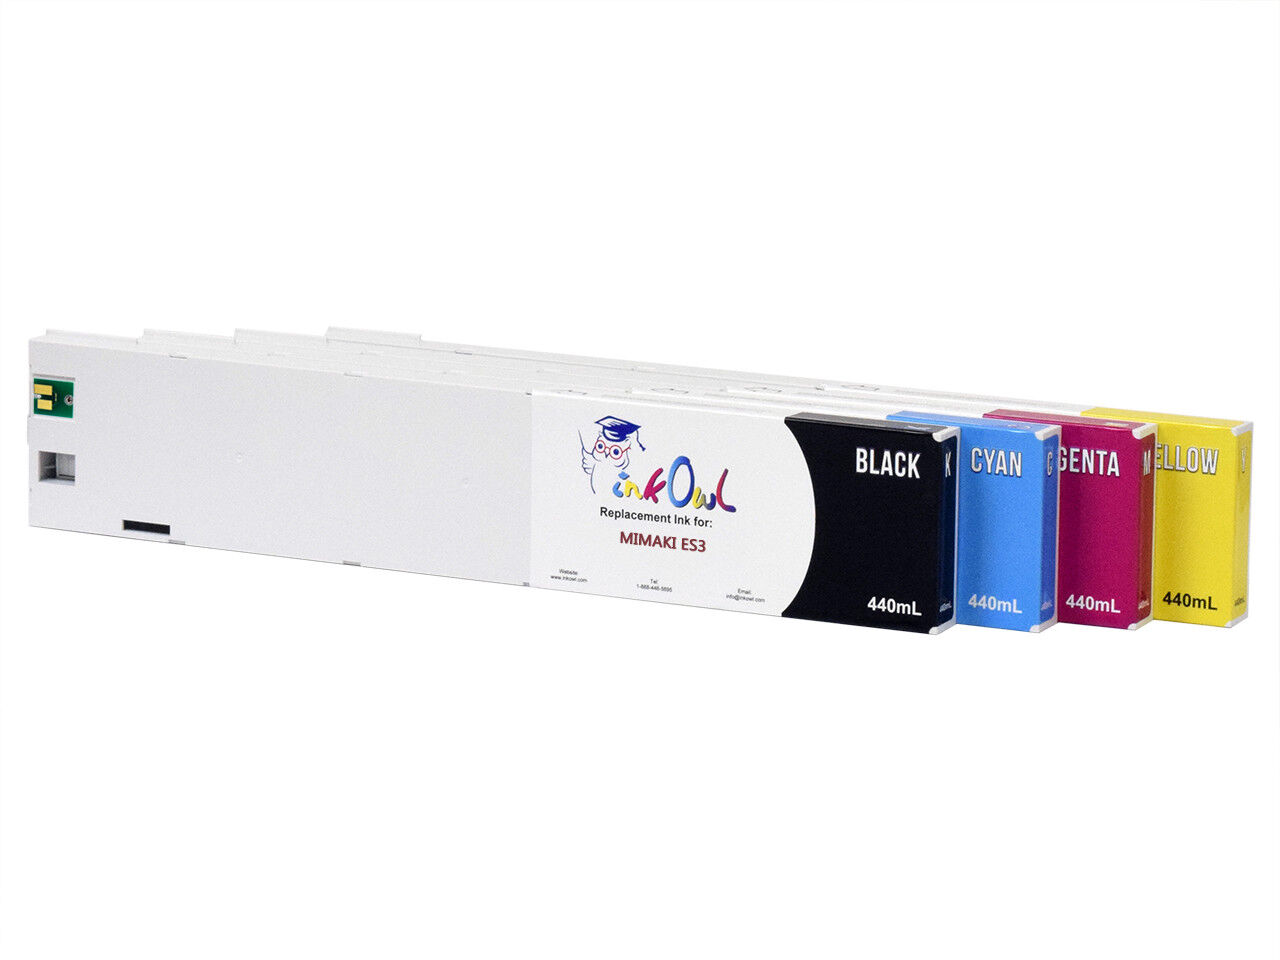 4x440ml InkOwl Compatible Cartridge Pack to replace Mimaki ES3